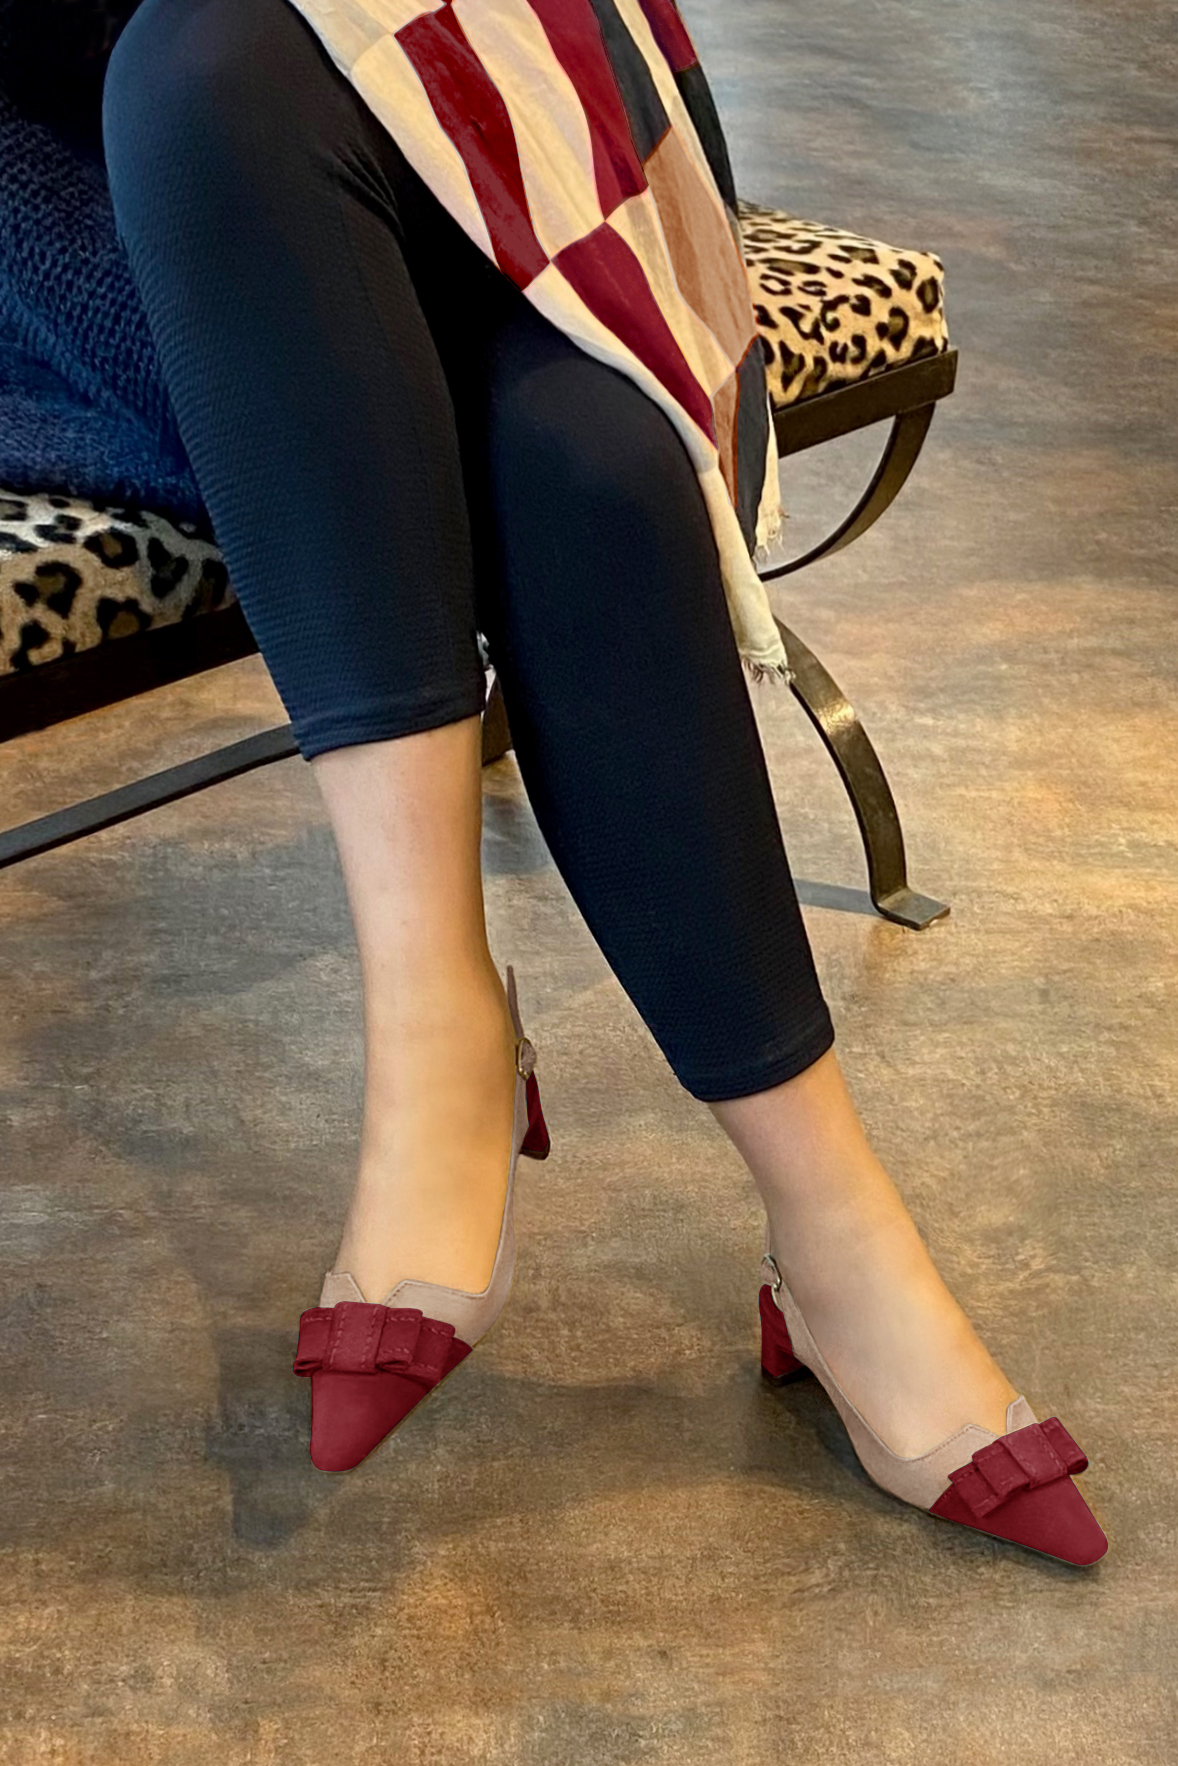 Burgundy red and tan beige matching shoes and . Worn view - Florence KOOIJMAN